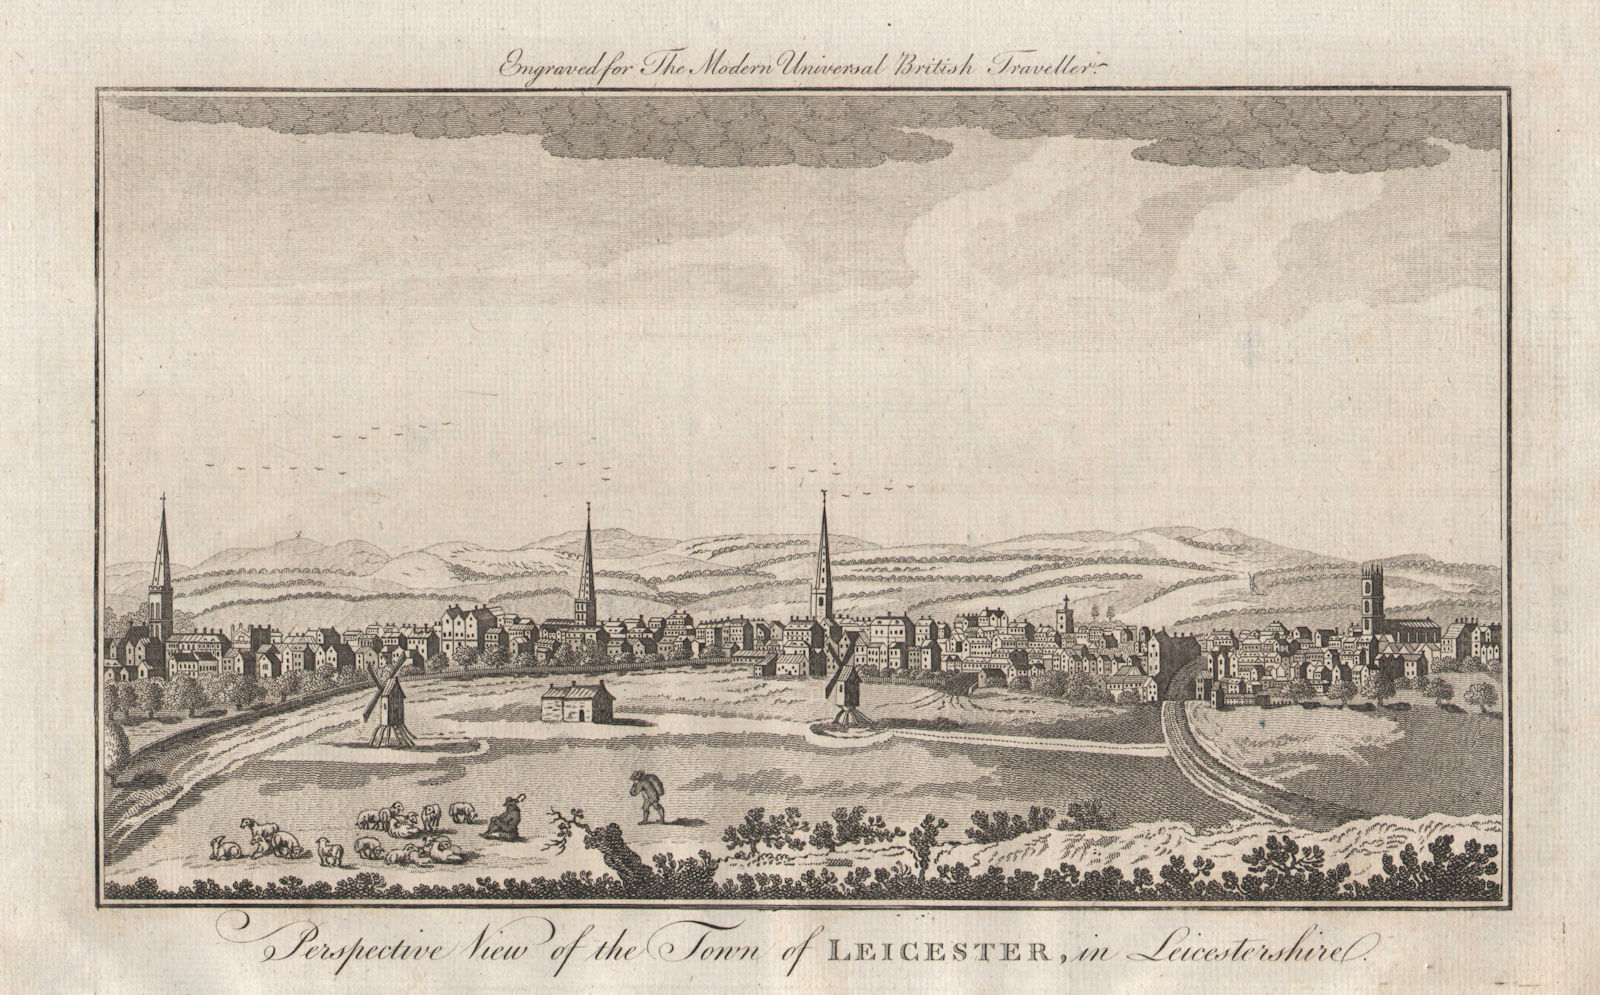 Perspective view of the town of Leicester, in Leicestershire. BURLINGTON 1779